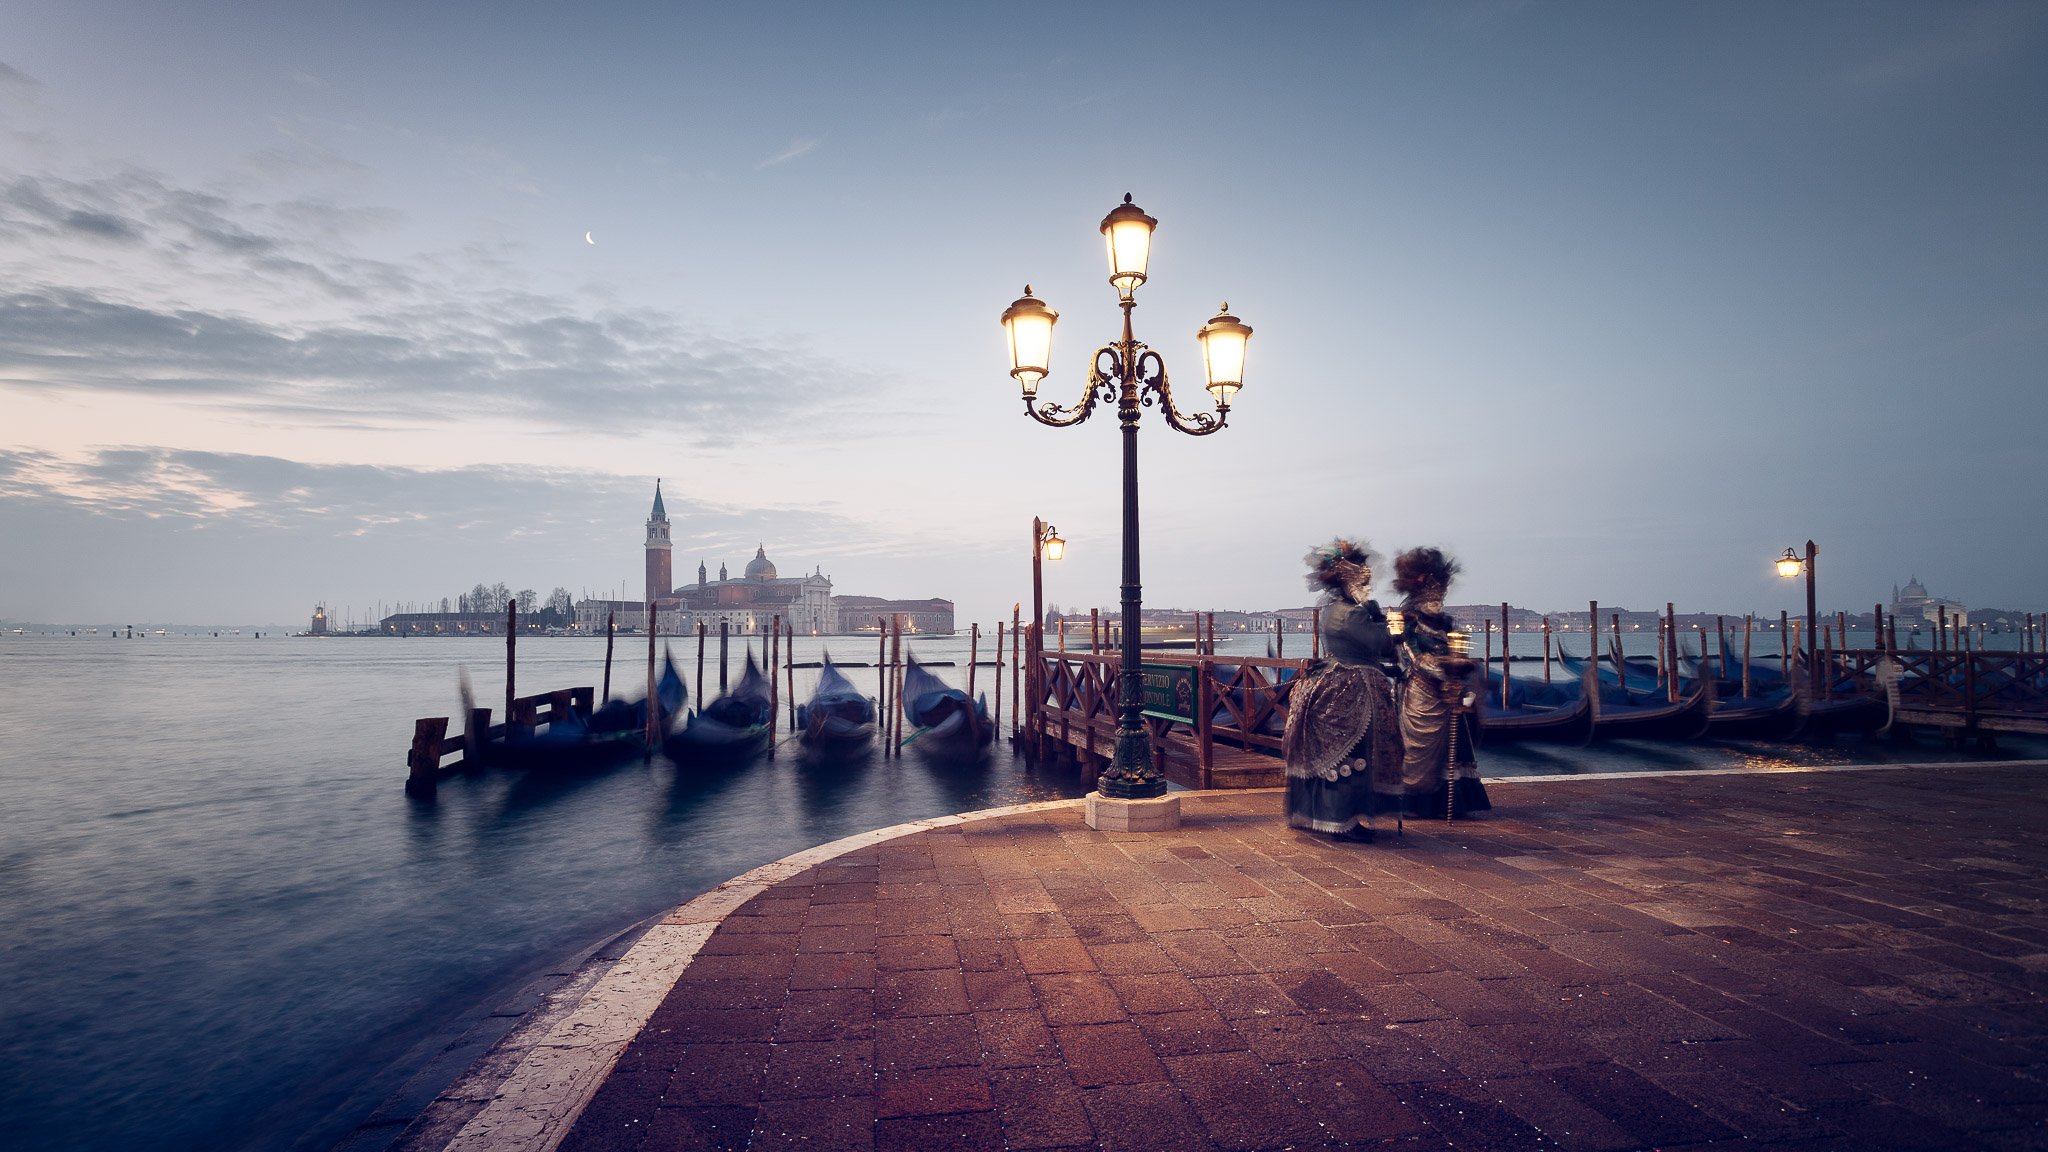 A couple of masked and costumed carnival attendants pose for photographers at sunrise in venice